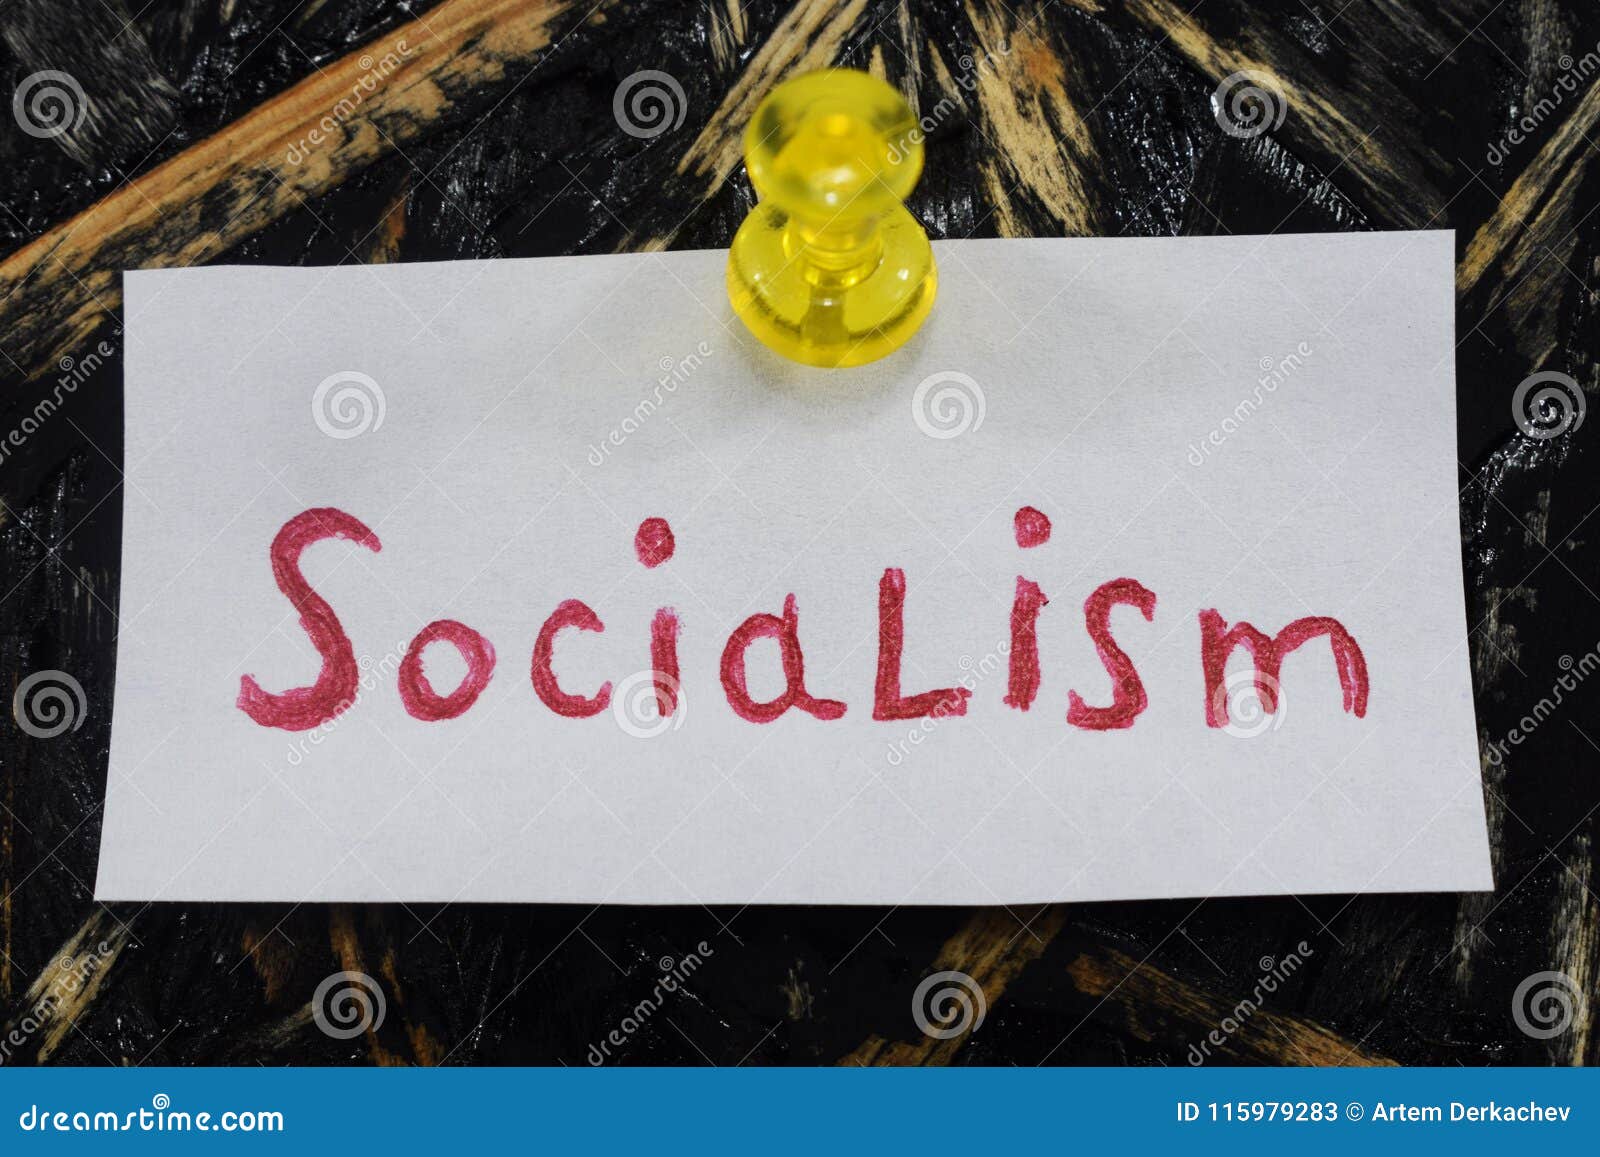 a simple and understandable inscription, socialism